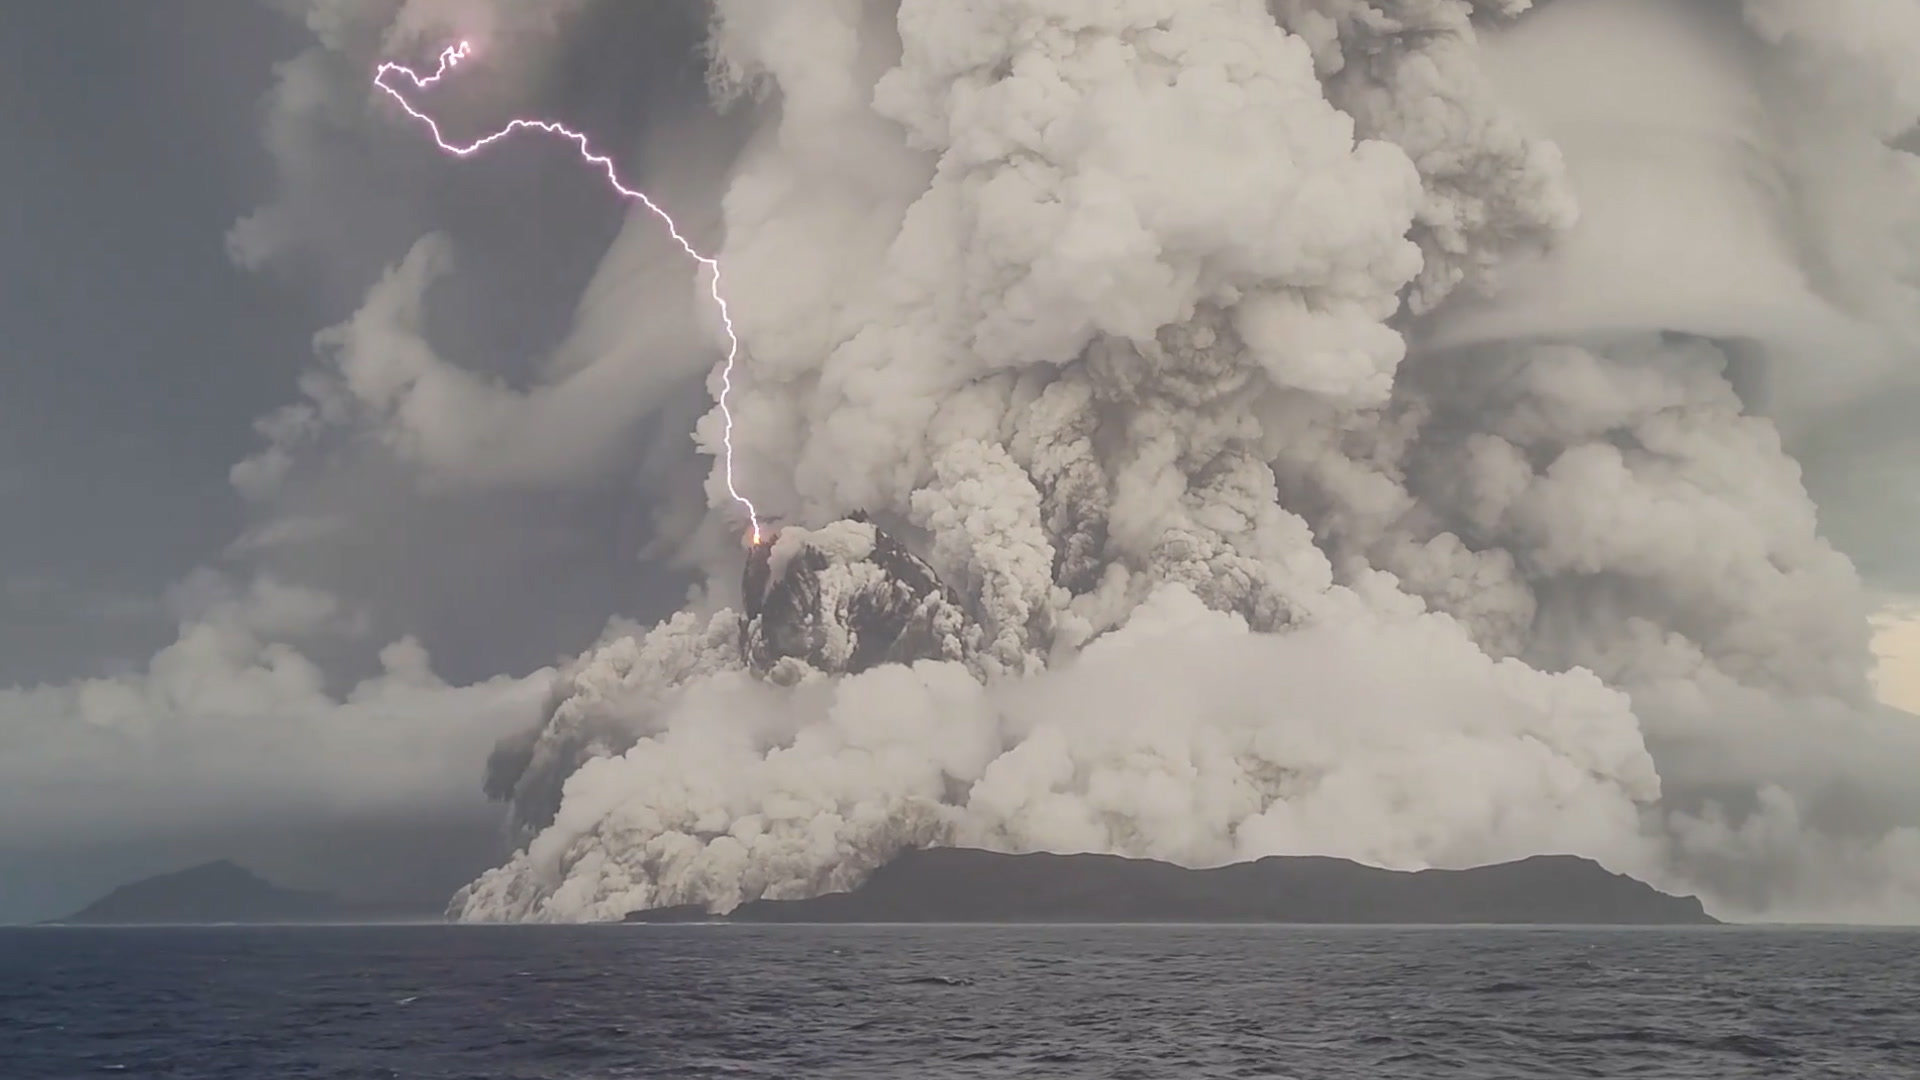 Tonga: Major Eruption in the South Pacific